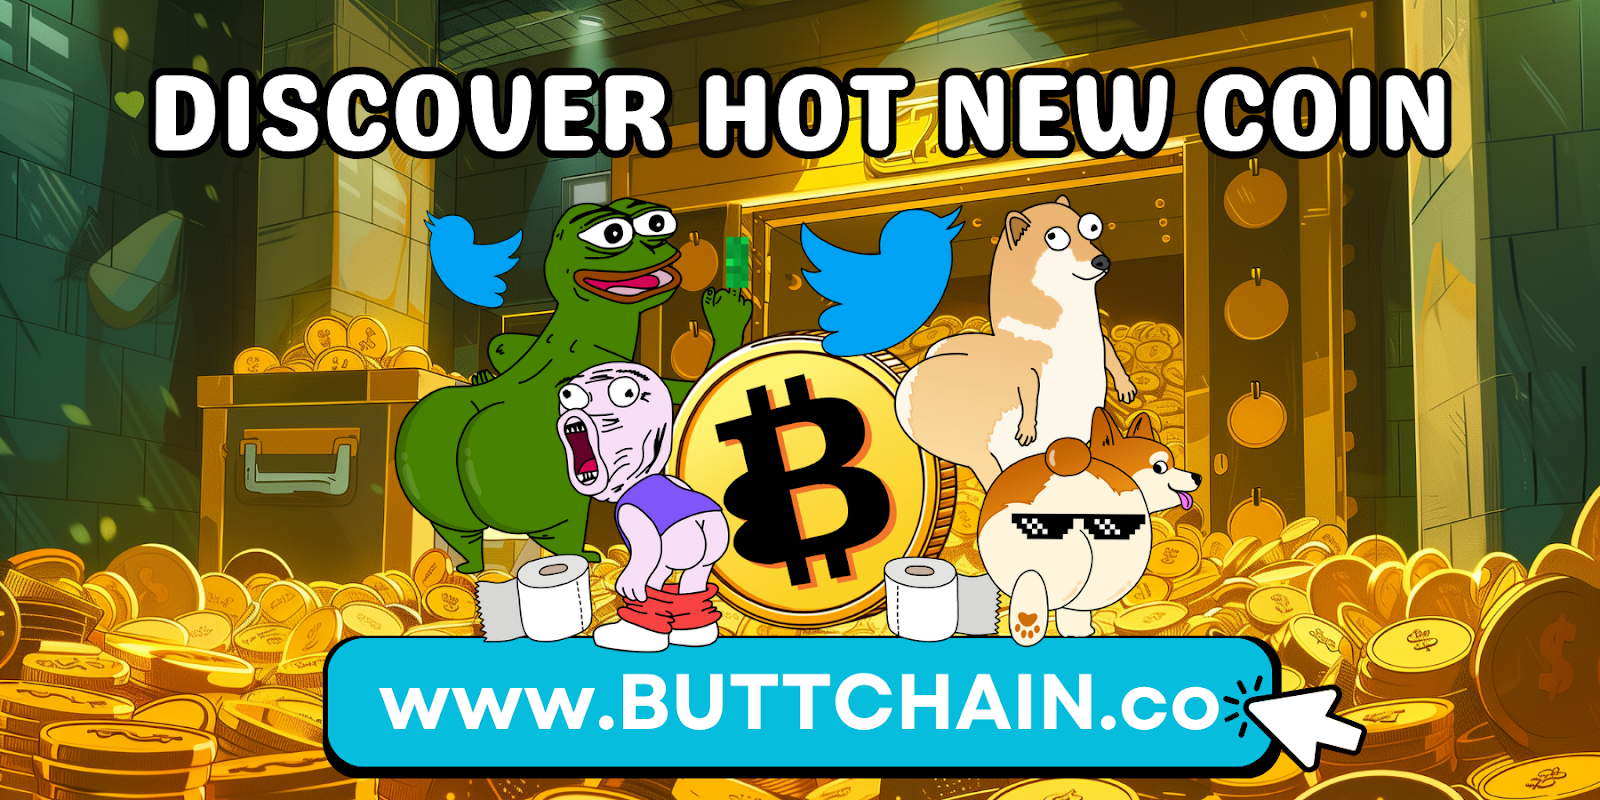 Visit ButtChain's official website and discover its fun and unique features